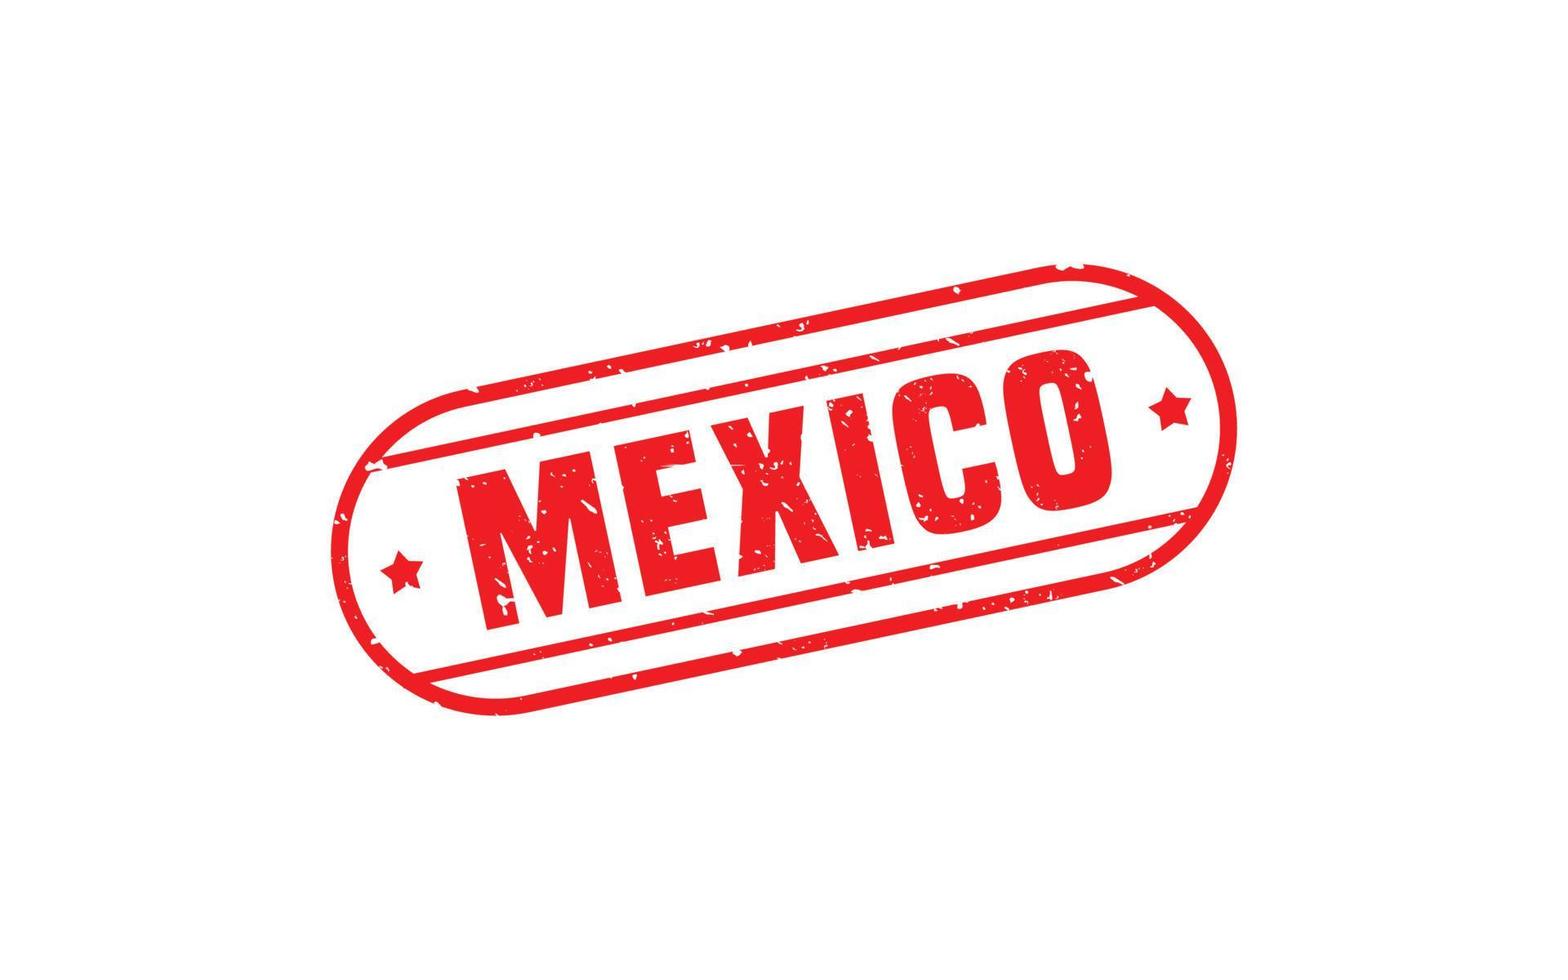 MEXICO stamp rubber with grunge style on white background vector